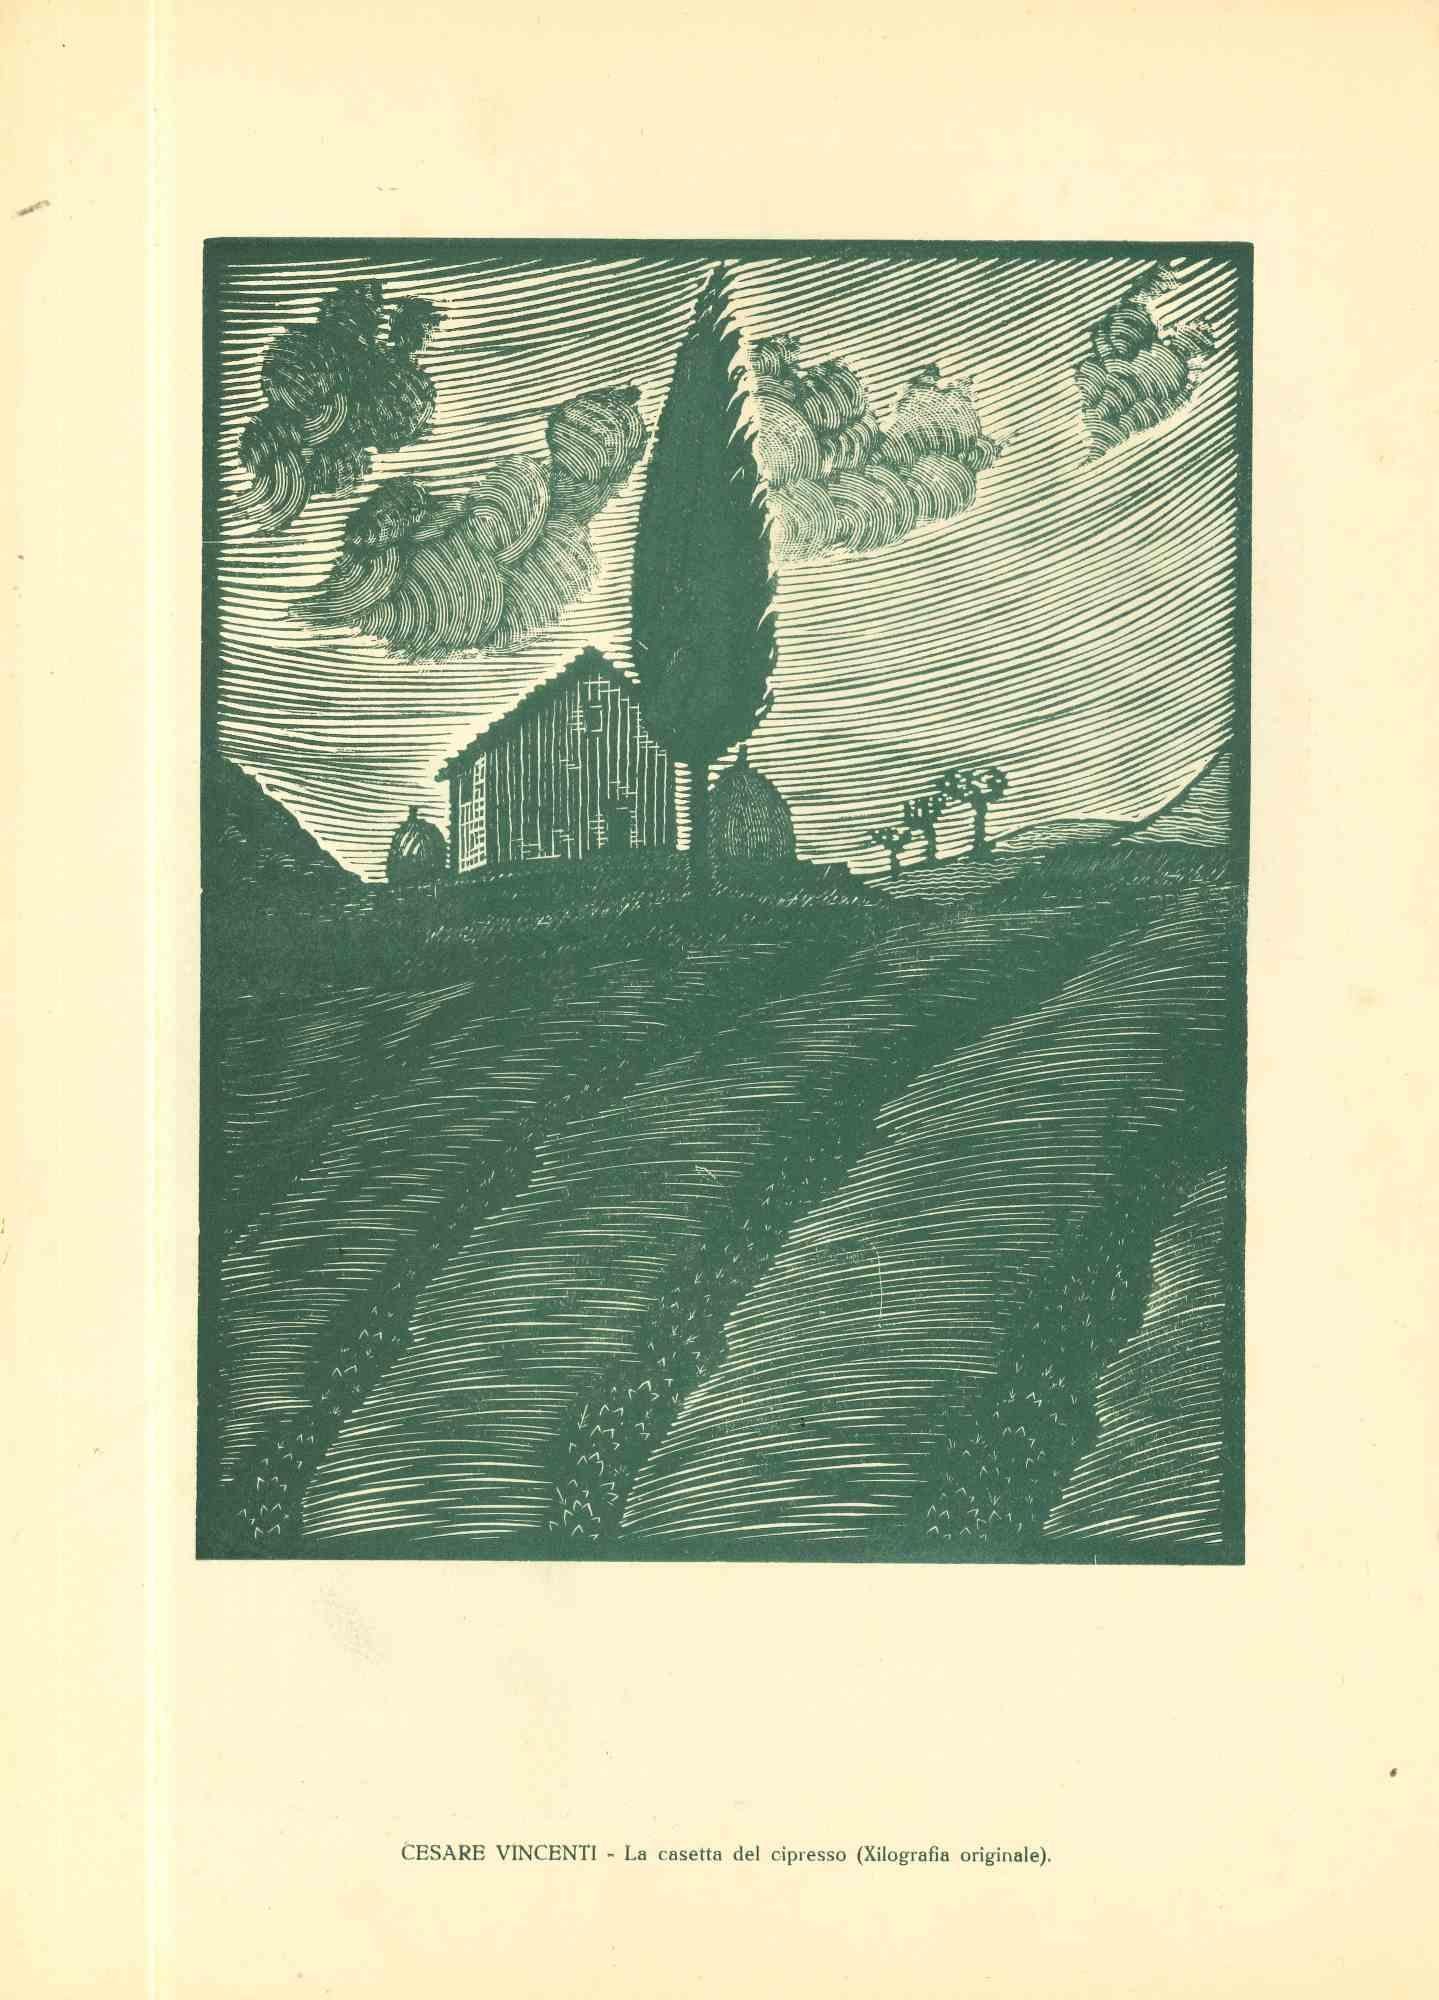 La Casetta del Cipresso (translated "House by the Cypress")is an original woodcut print realized by Cesare Vincenti in the early 20th century.

Good conditions.

The artwork is depicted through strong strokes in a well-balanced composition.
